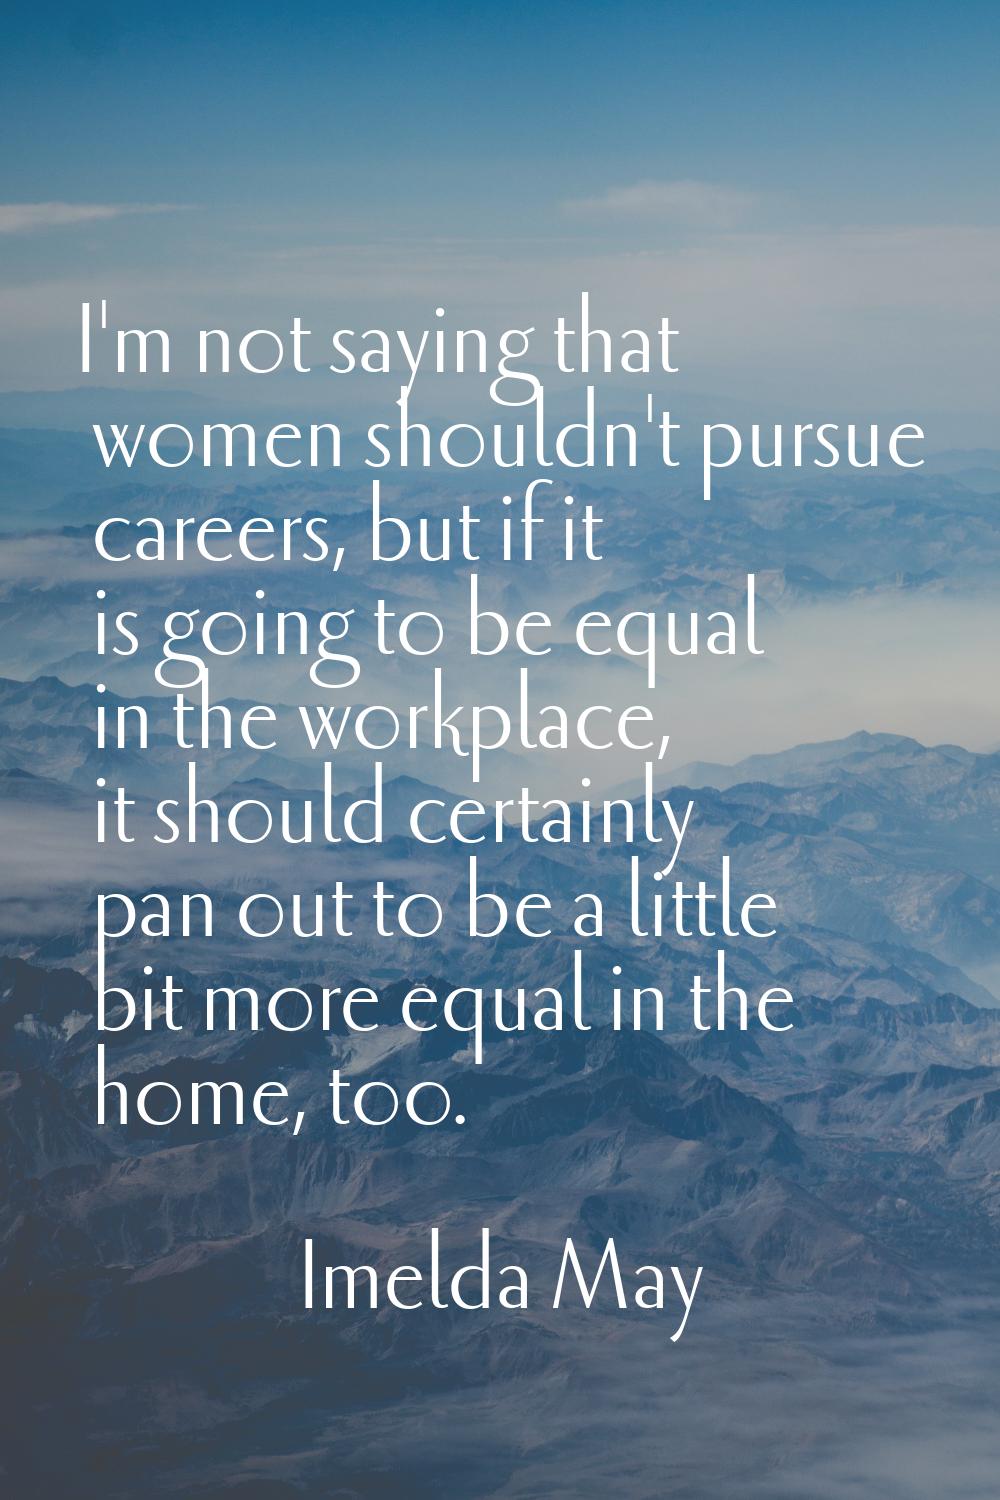 I'm not saying that women shouldn't pursue careers, but if it is going to be equal in the workplace